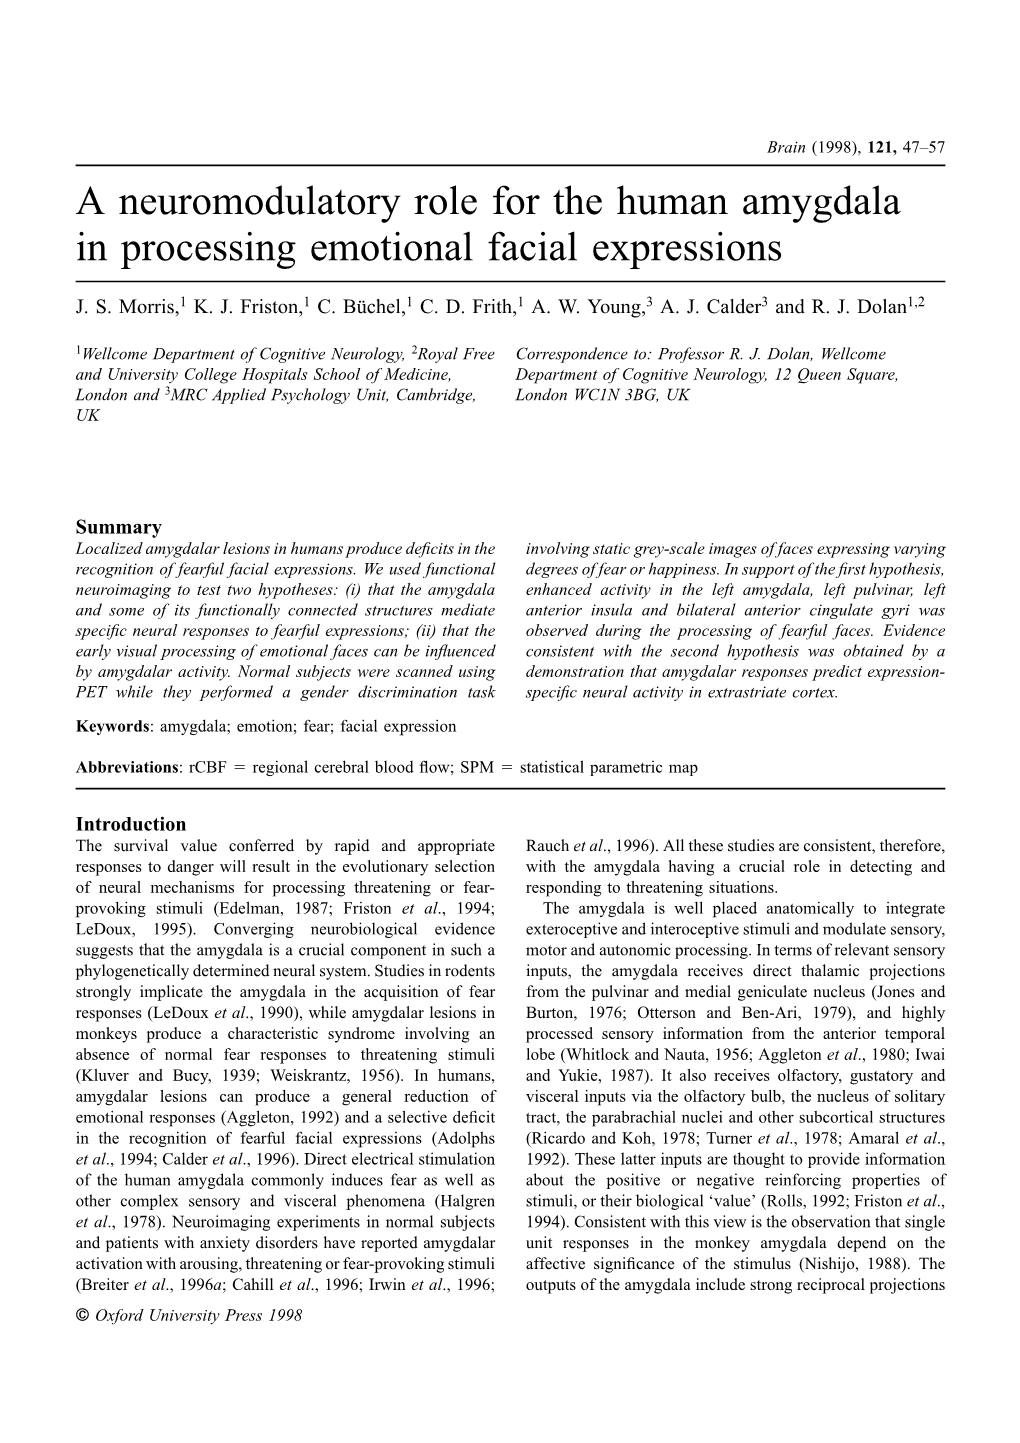 A Neuromodulatory Role for the Human Amygdala in Processing Emotional Facial Expressions